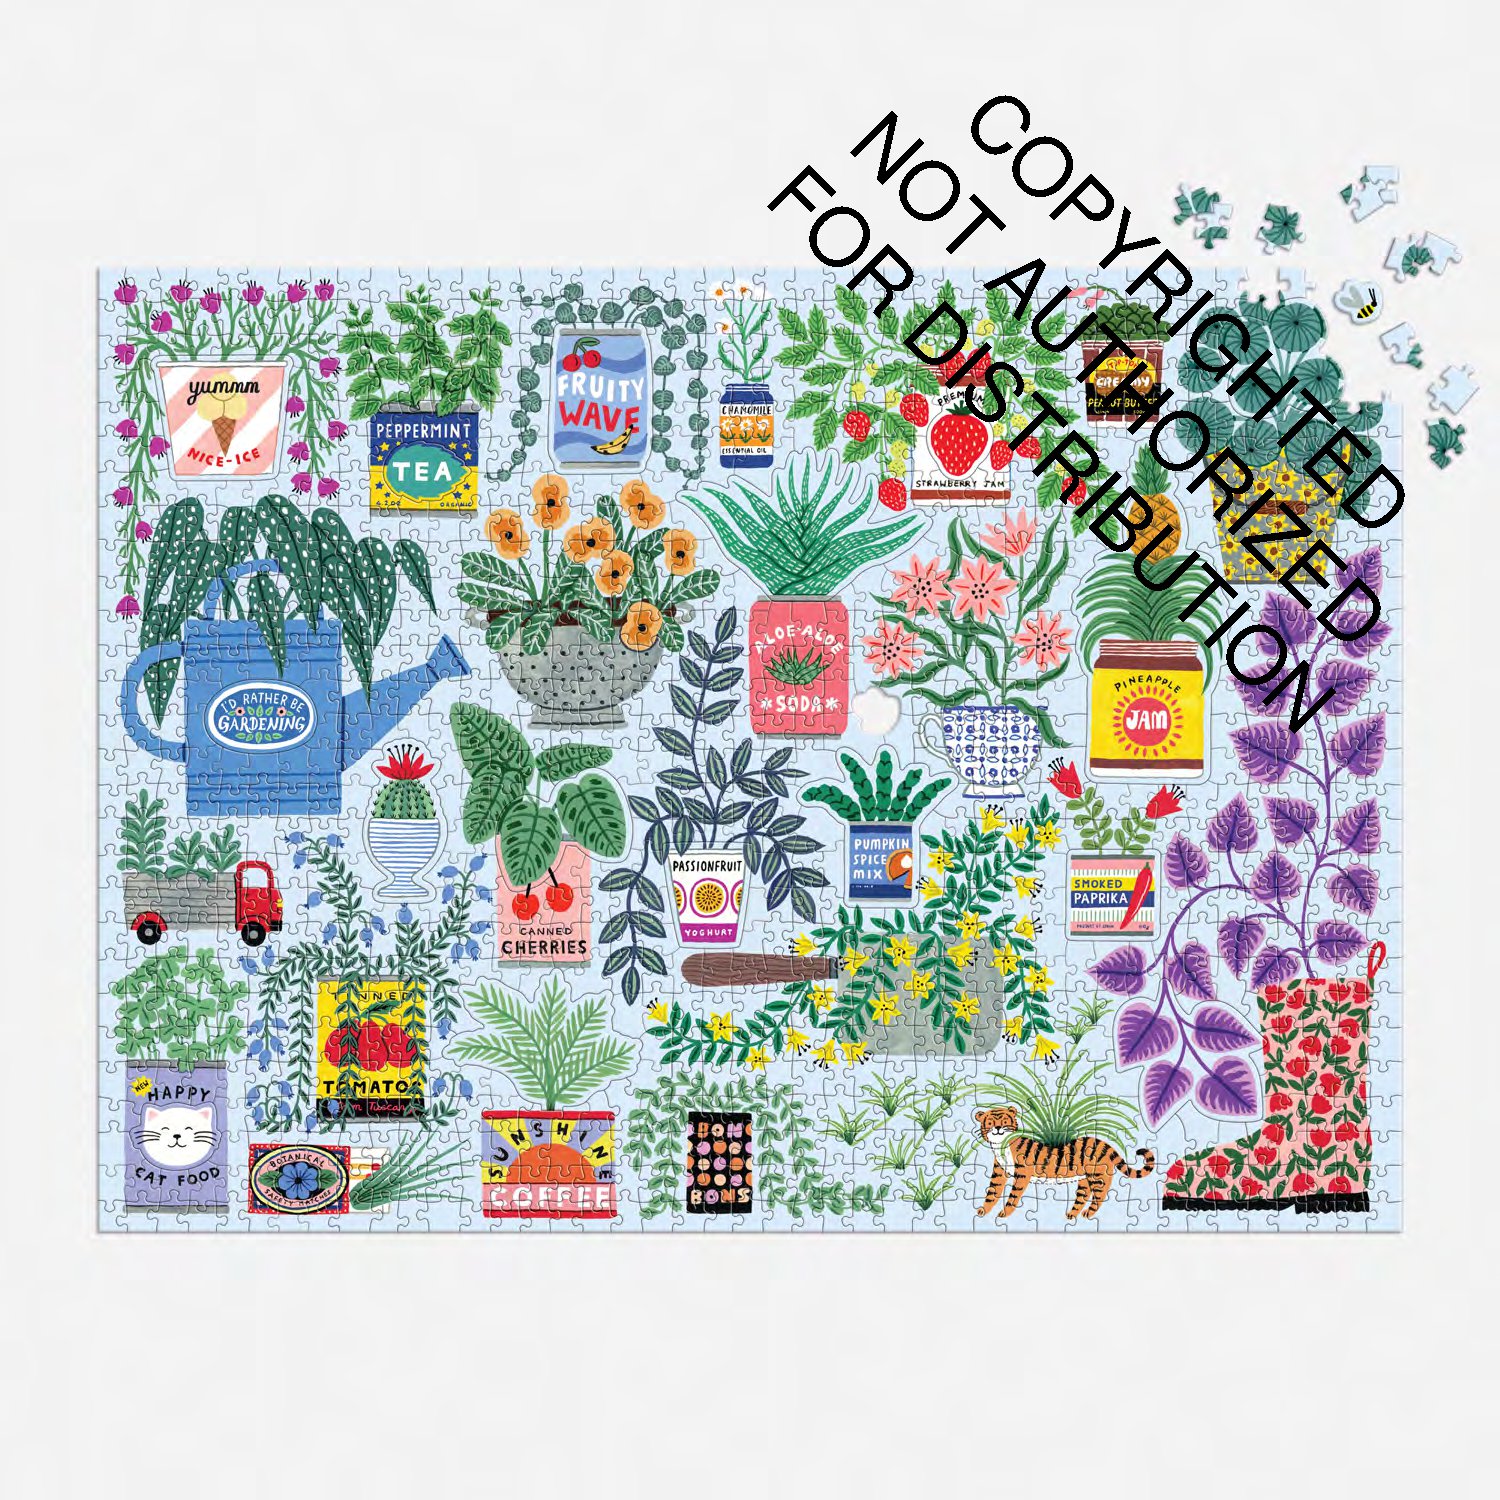 Planter Perfection 1000 Piece Puzzle with Shaped Pieces